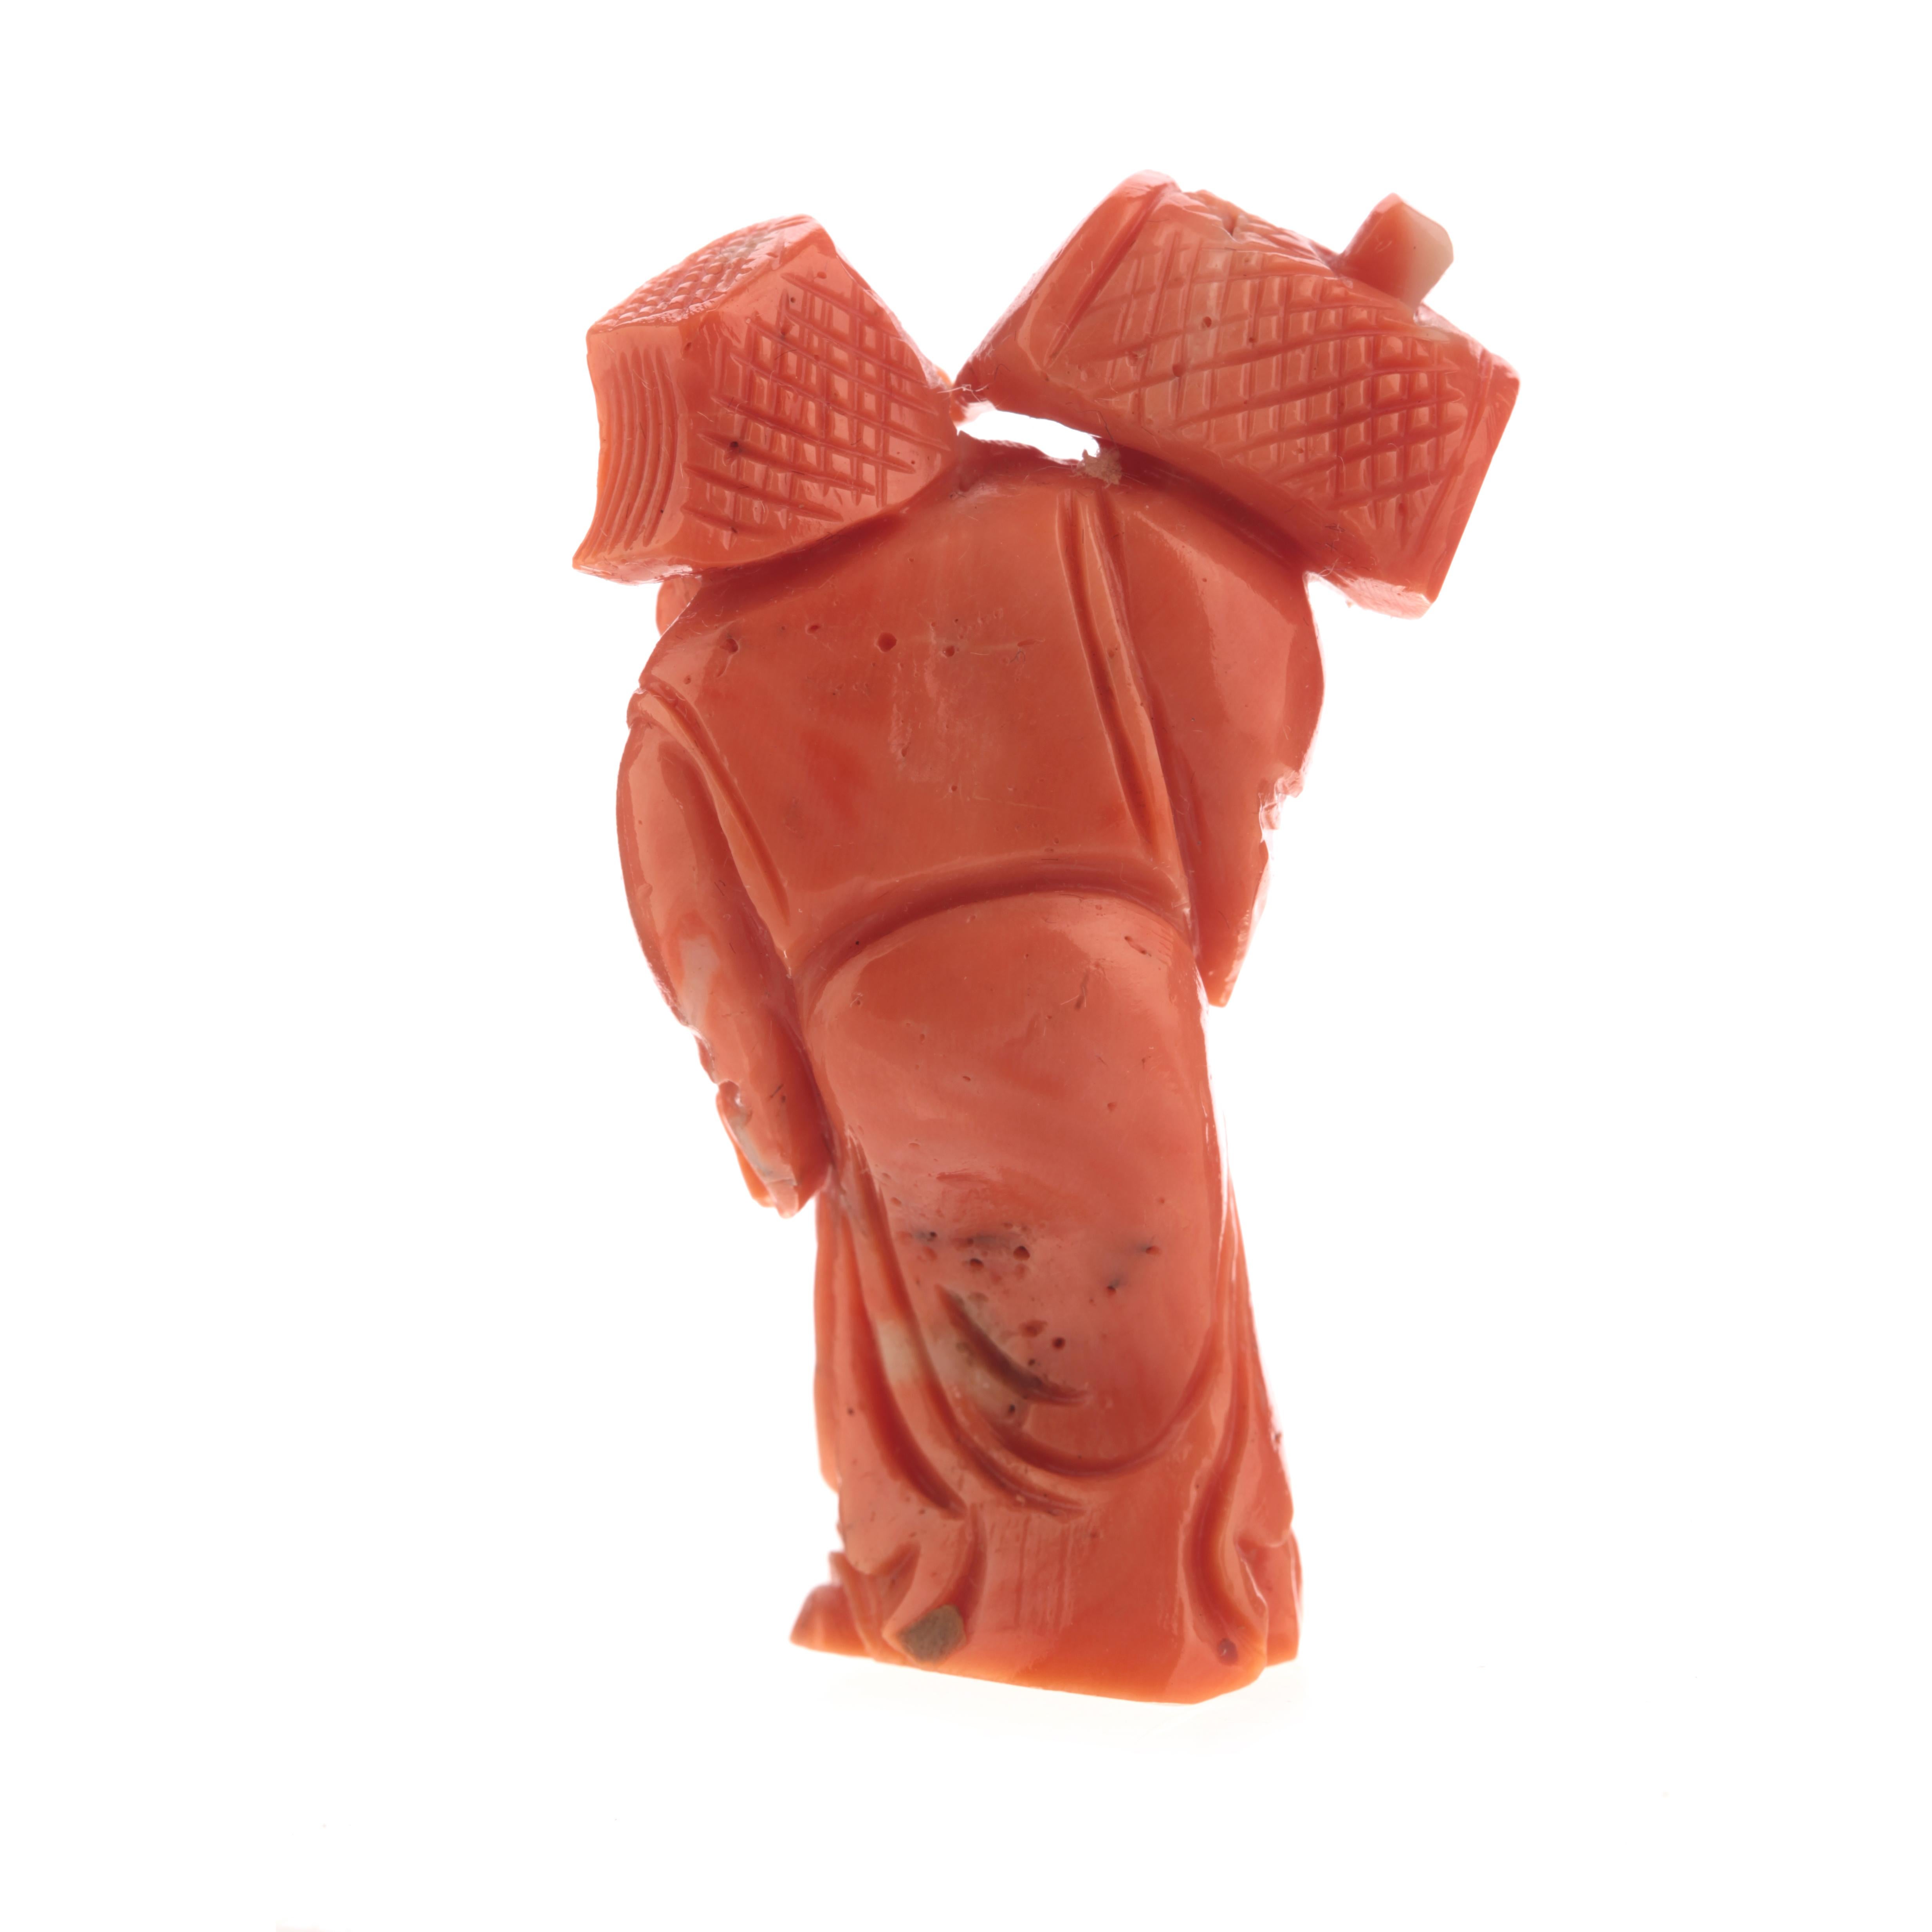 Chinese Export Wise Man Buddhist Carved Asian Decorative Art Statue Sculpture Natural Red Coral For Sale